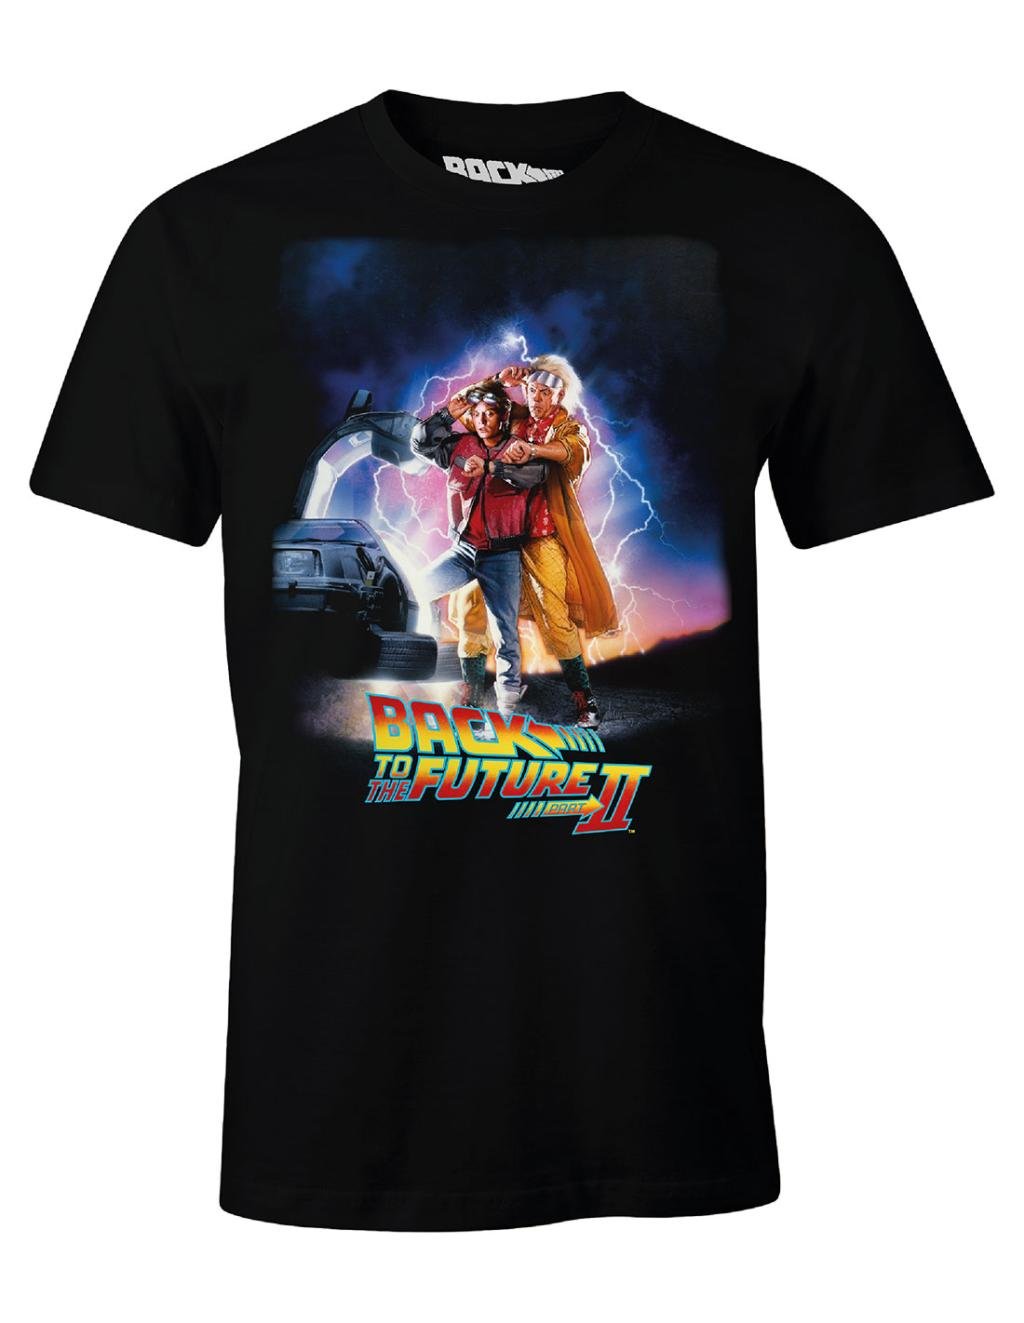 BACK TO THE FUTURE - Back to the Future Part II Poster T-Shirt (L)